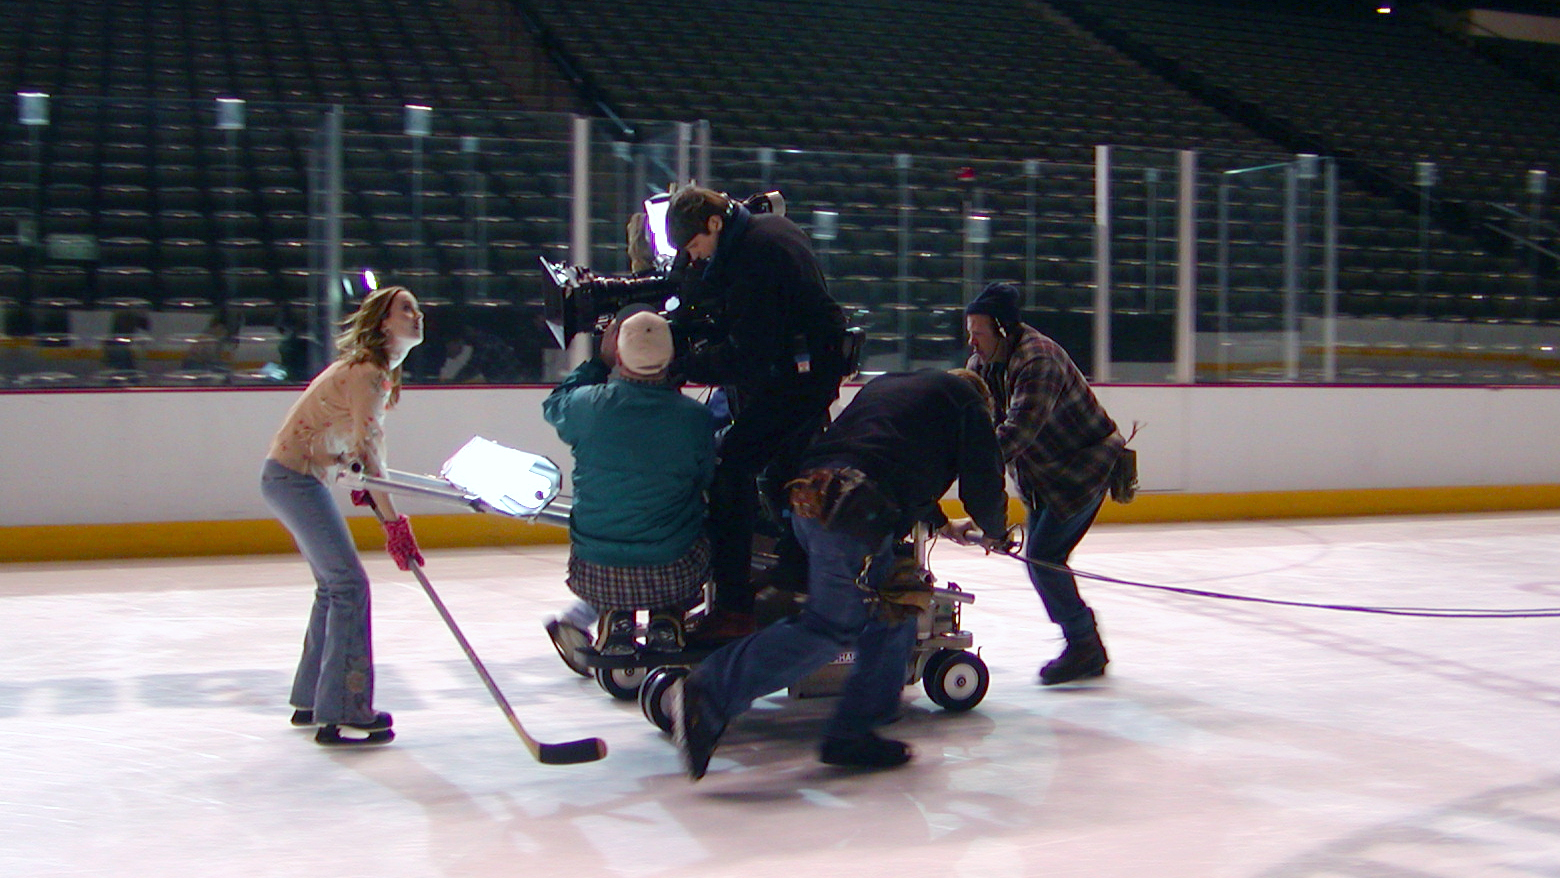 On the ice shooting a 